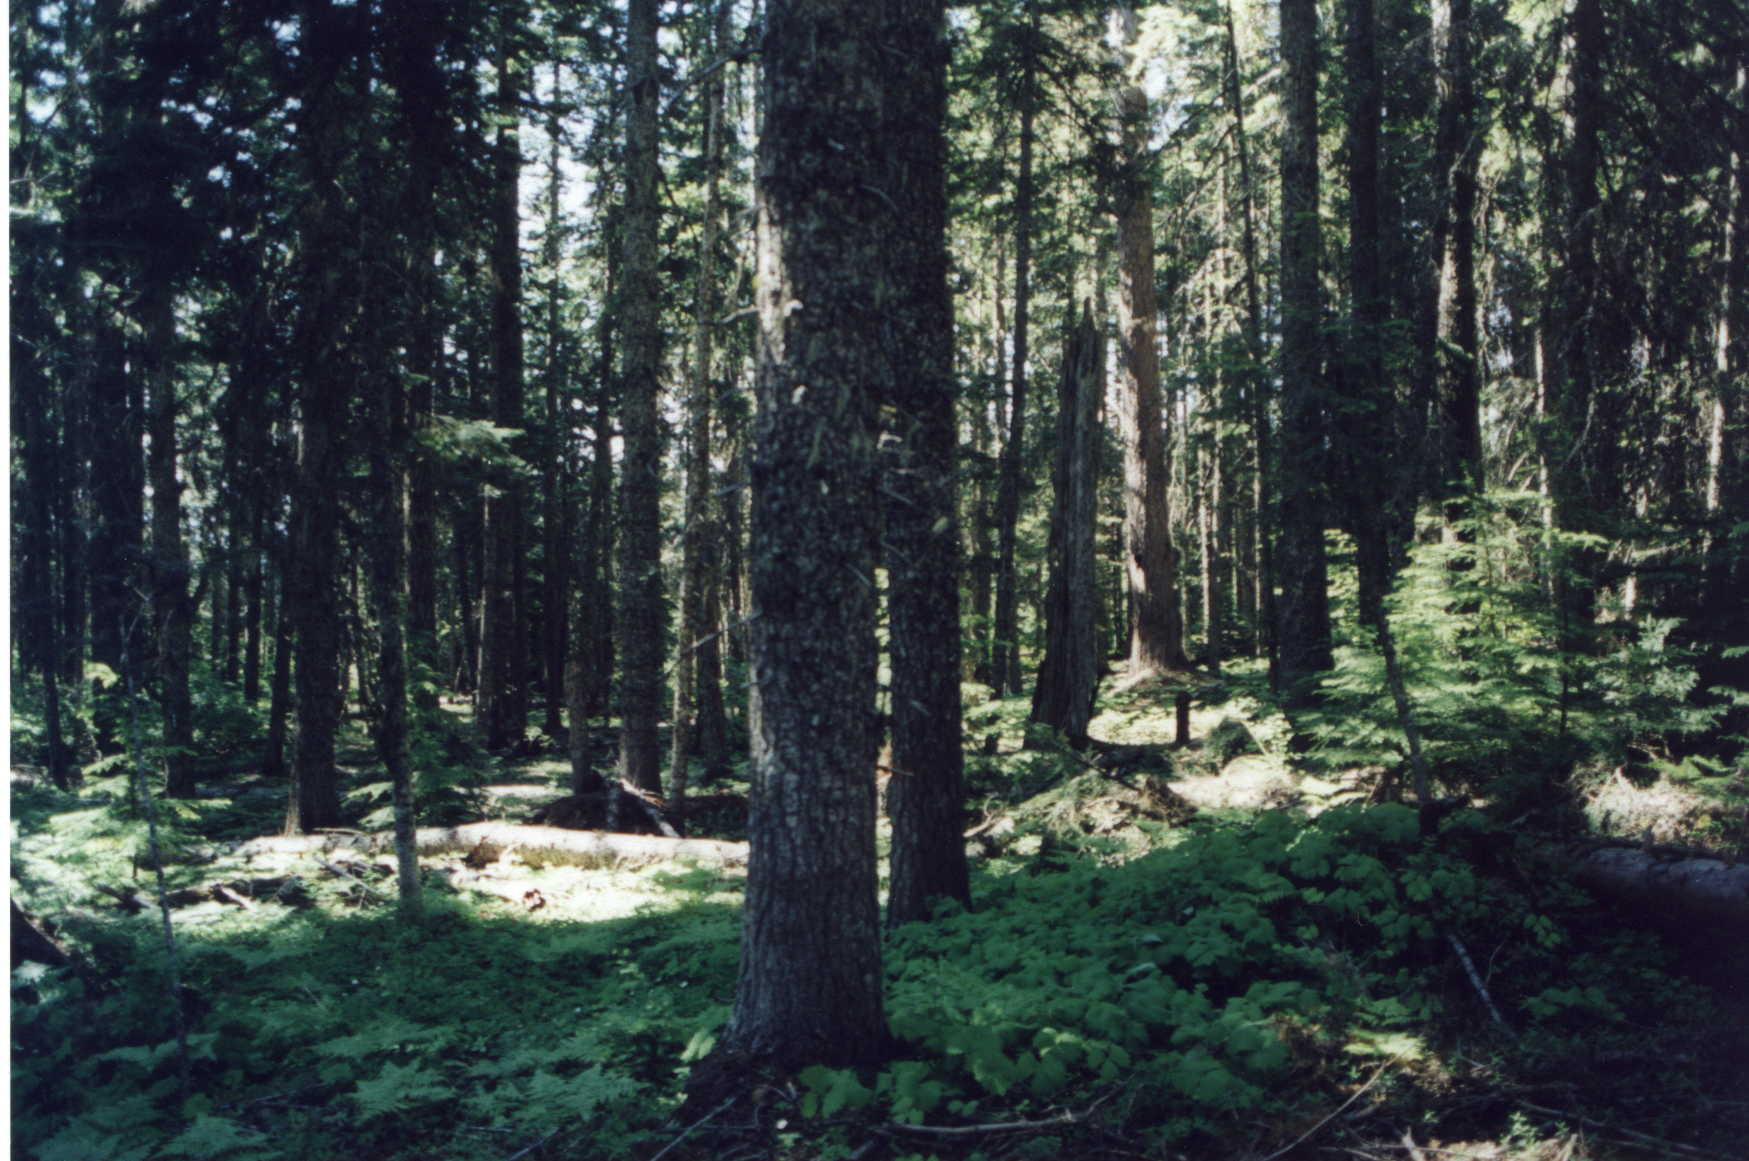 This is a photo of the Upper Boulder Timber Sale before it was cut. There are some sizeable trees, plenty of fern filled groundcover, and some midstory trees.